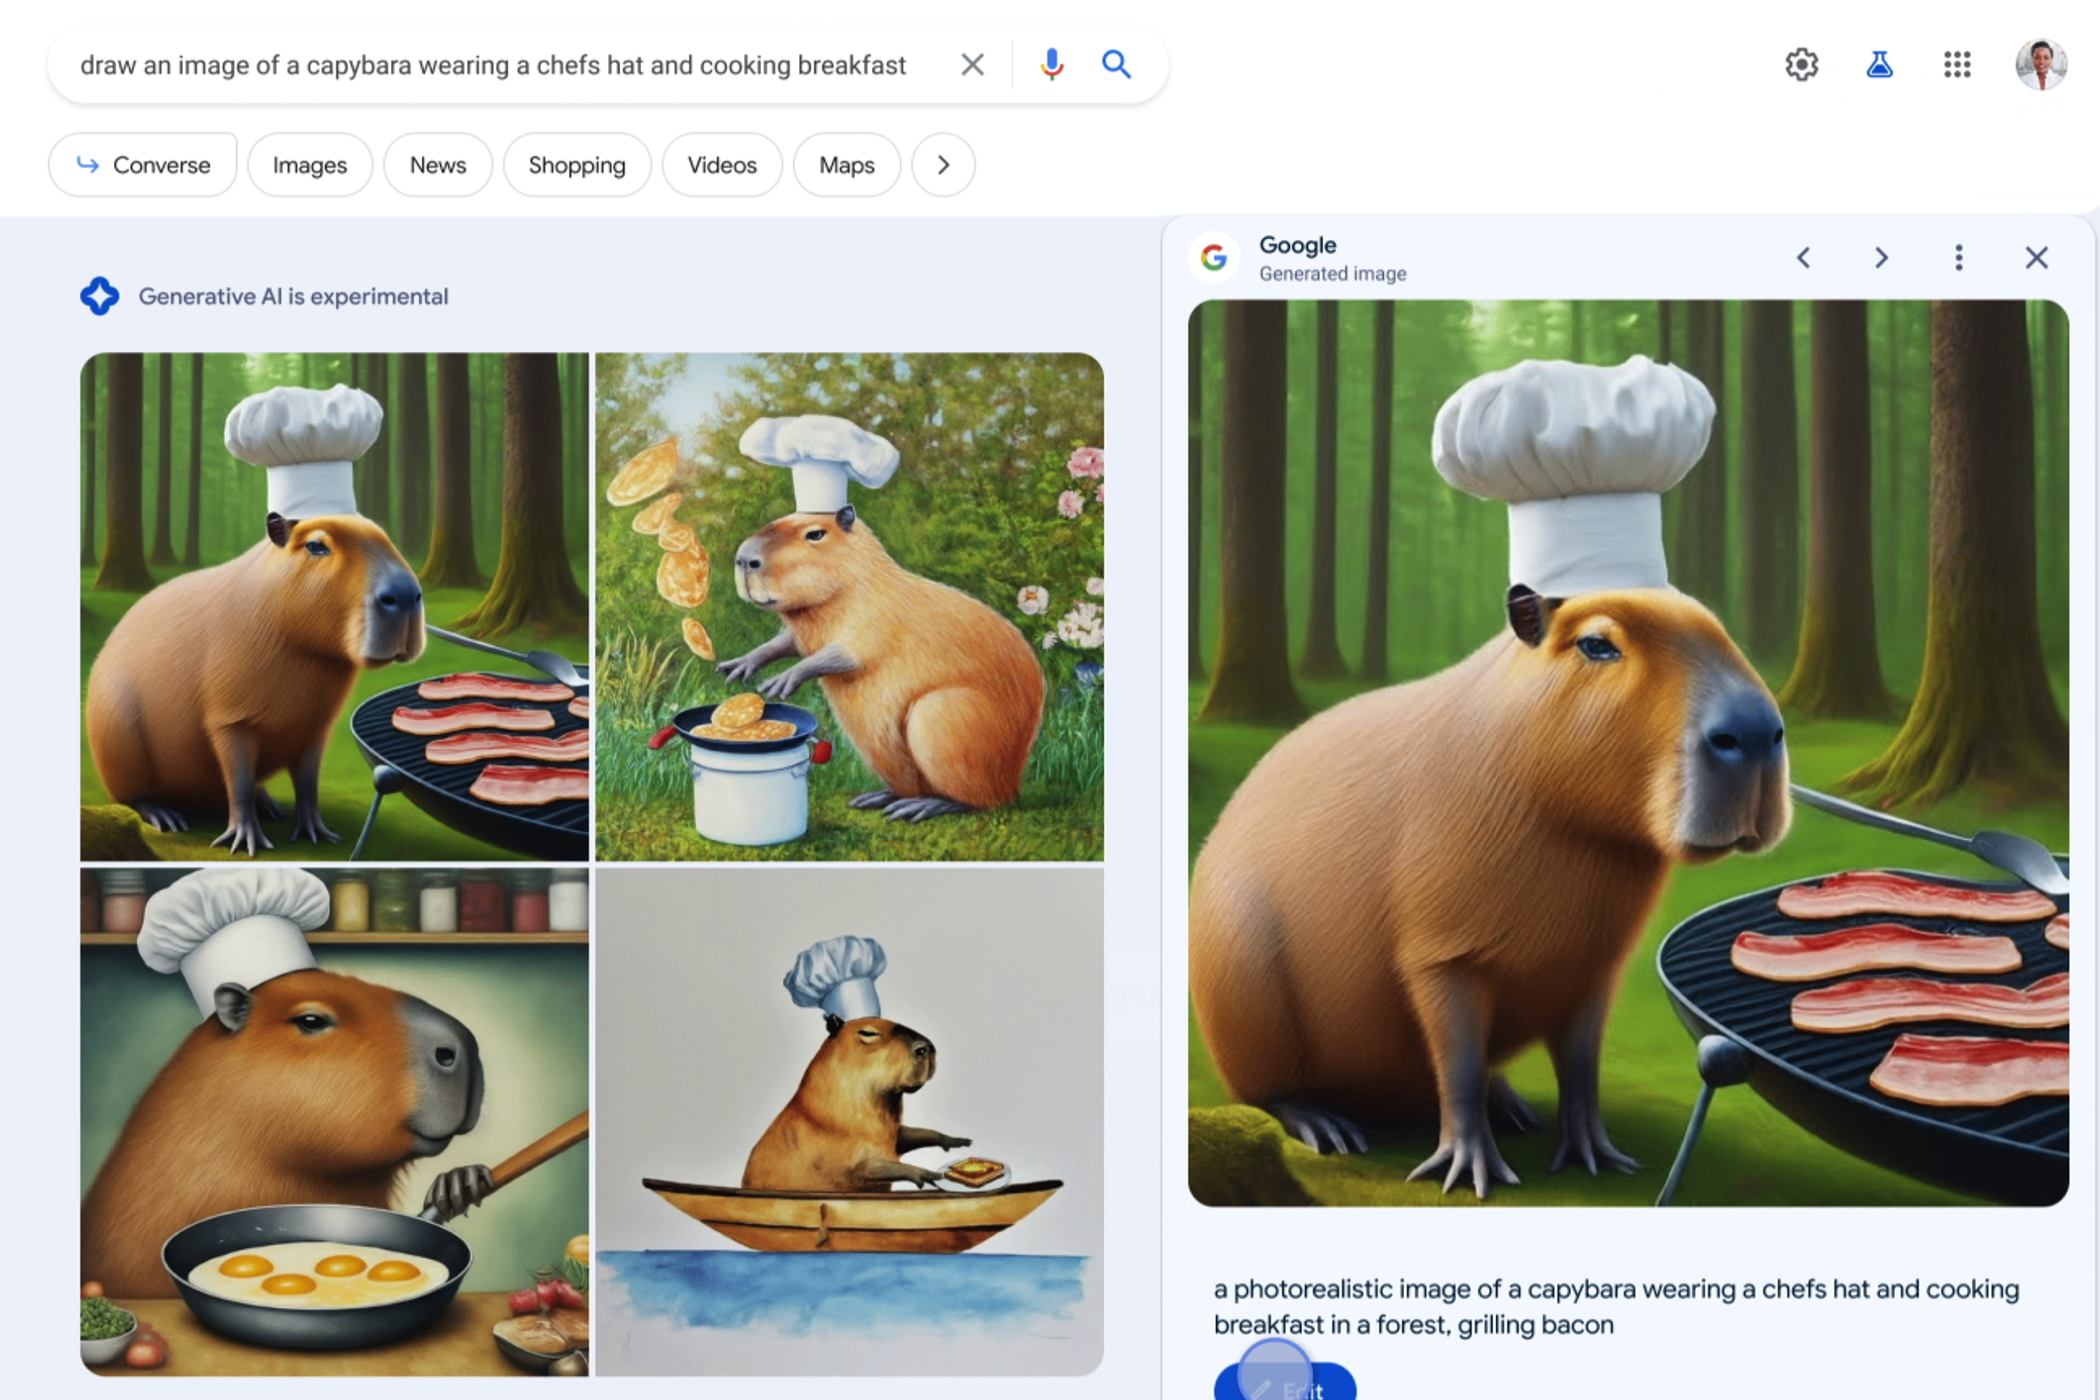 Generating images of a capybara cooking breakfast in Google Search.